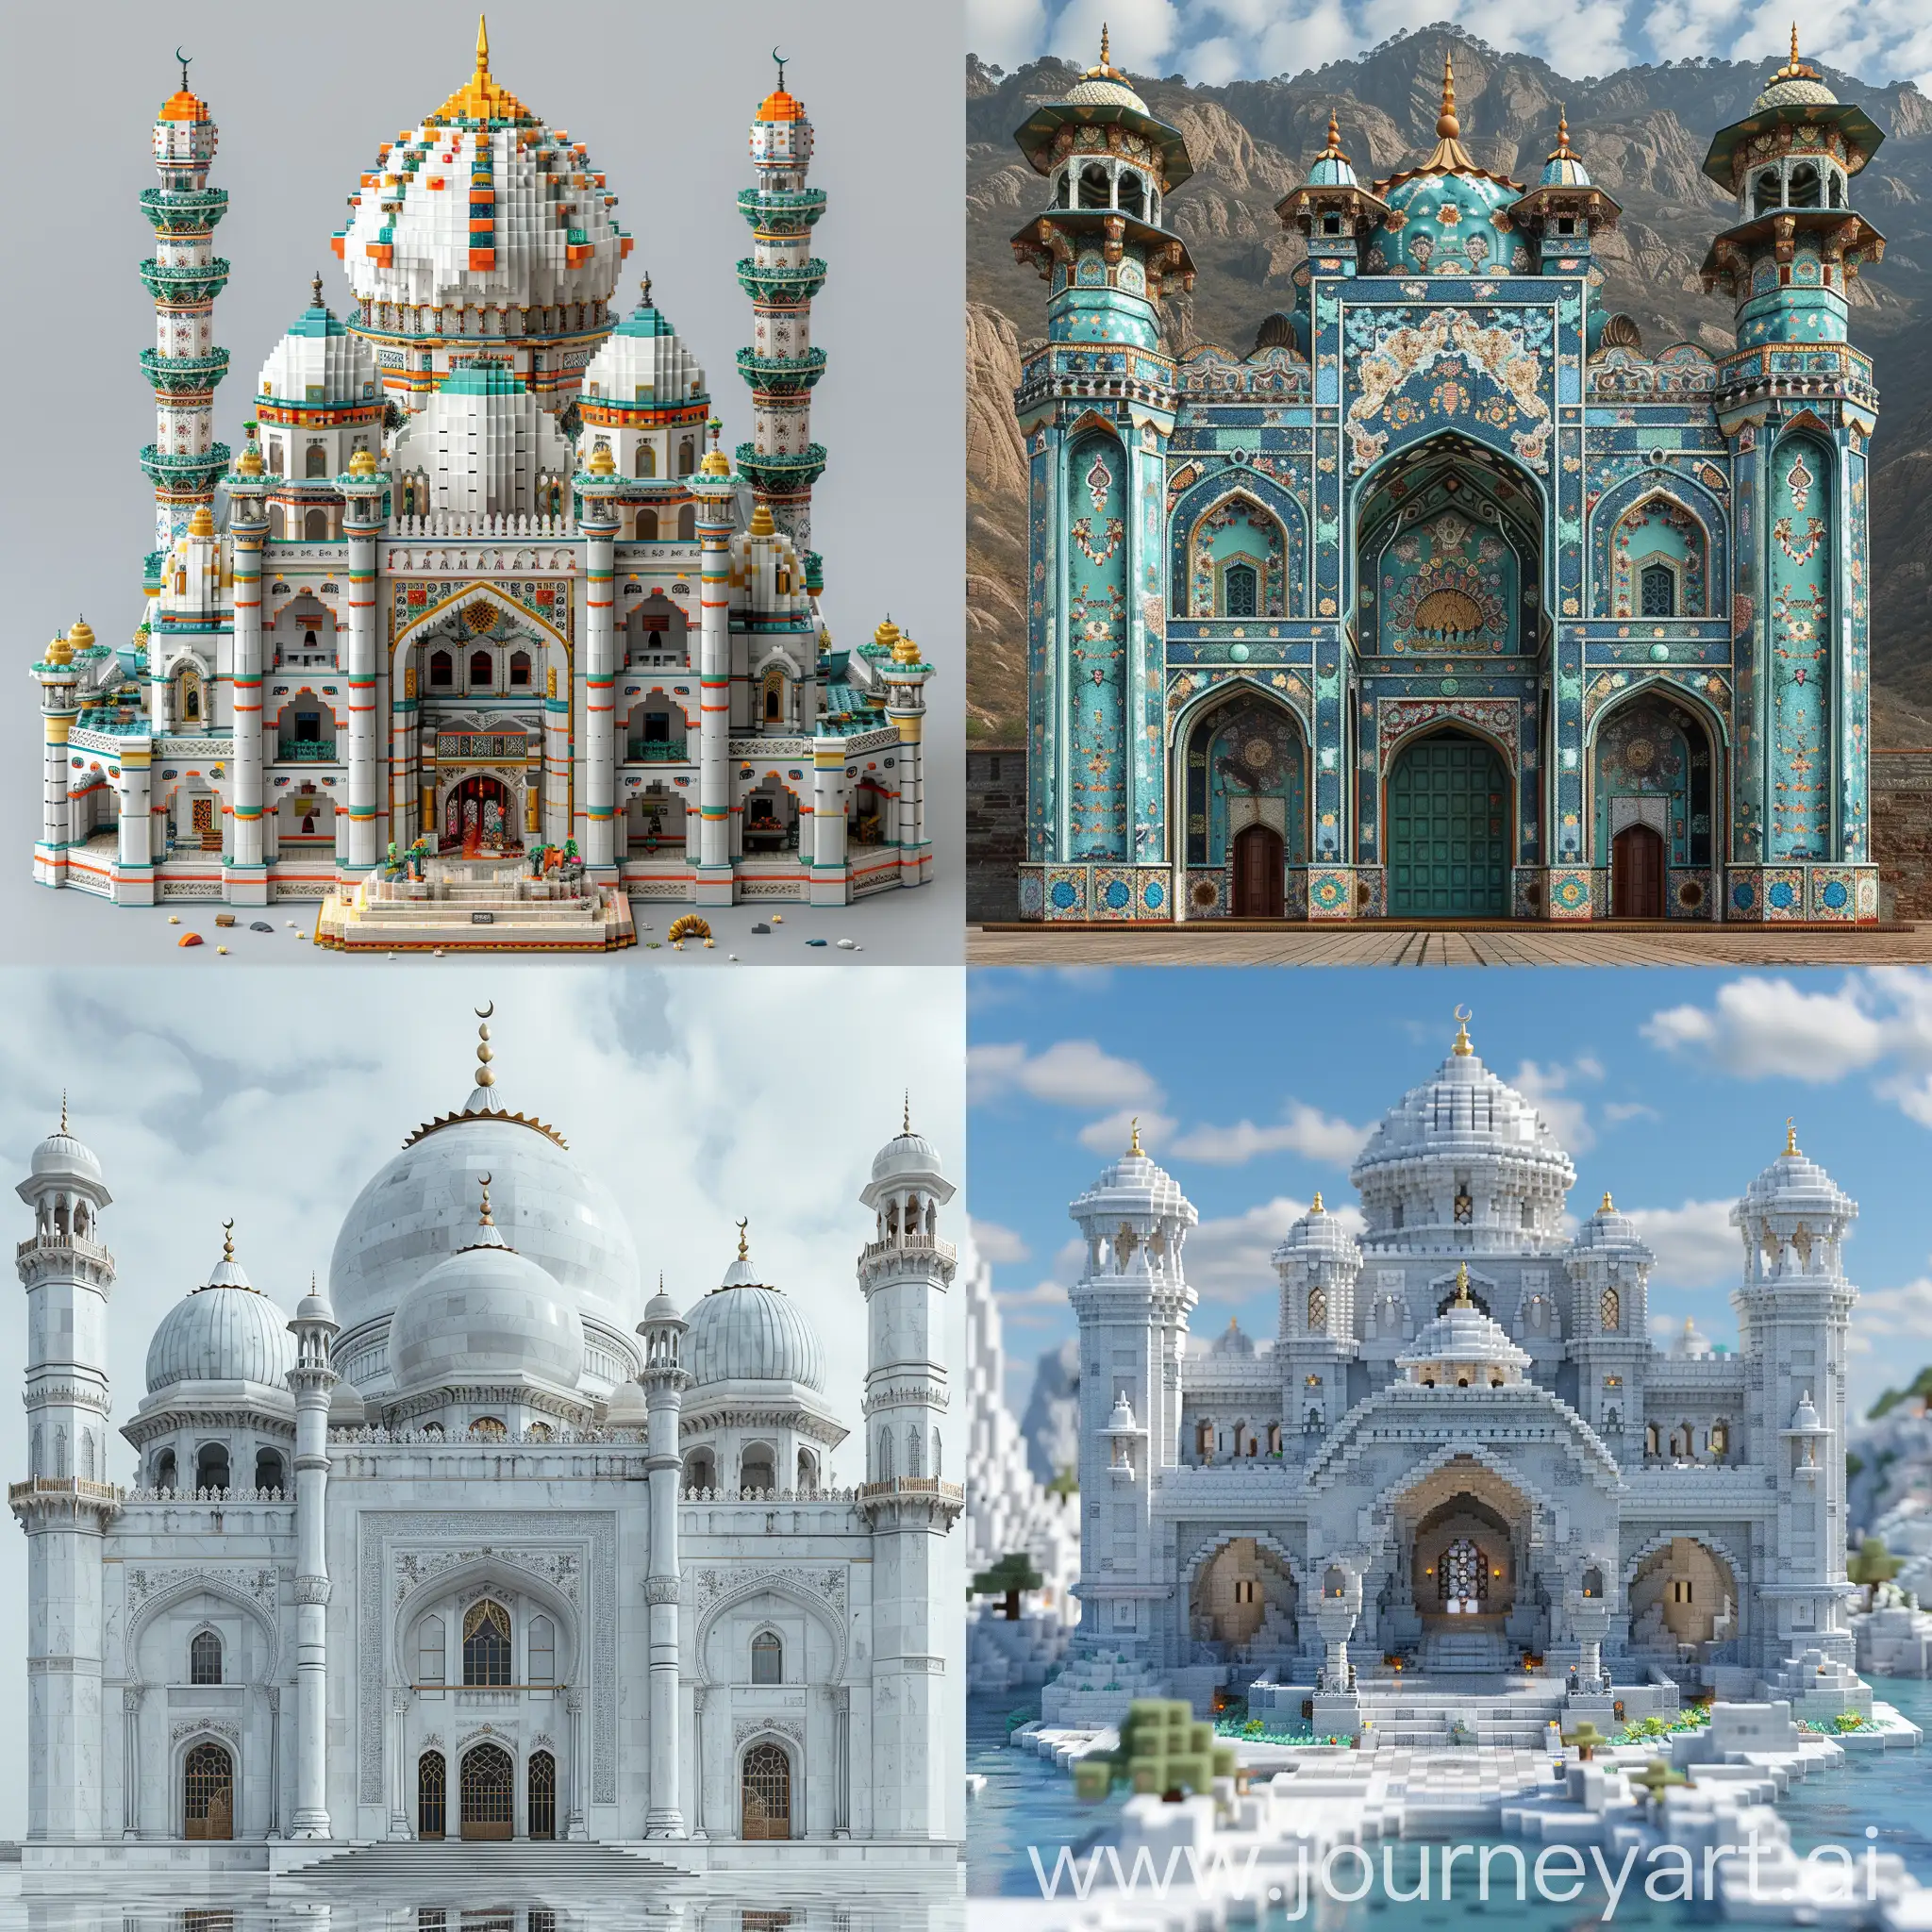 Persian-Tiled-Castle-Mosque-Inspired-by-Taj-Mahal-and-IslamicGothic-Architecture